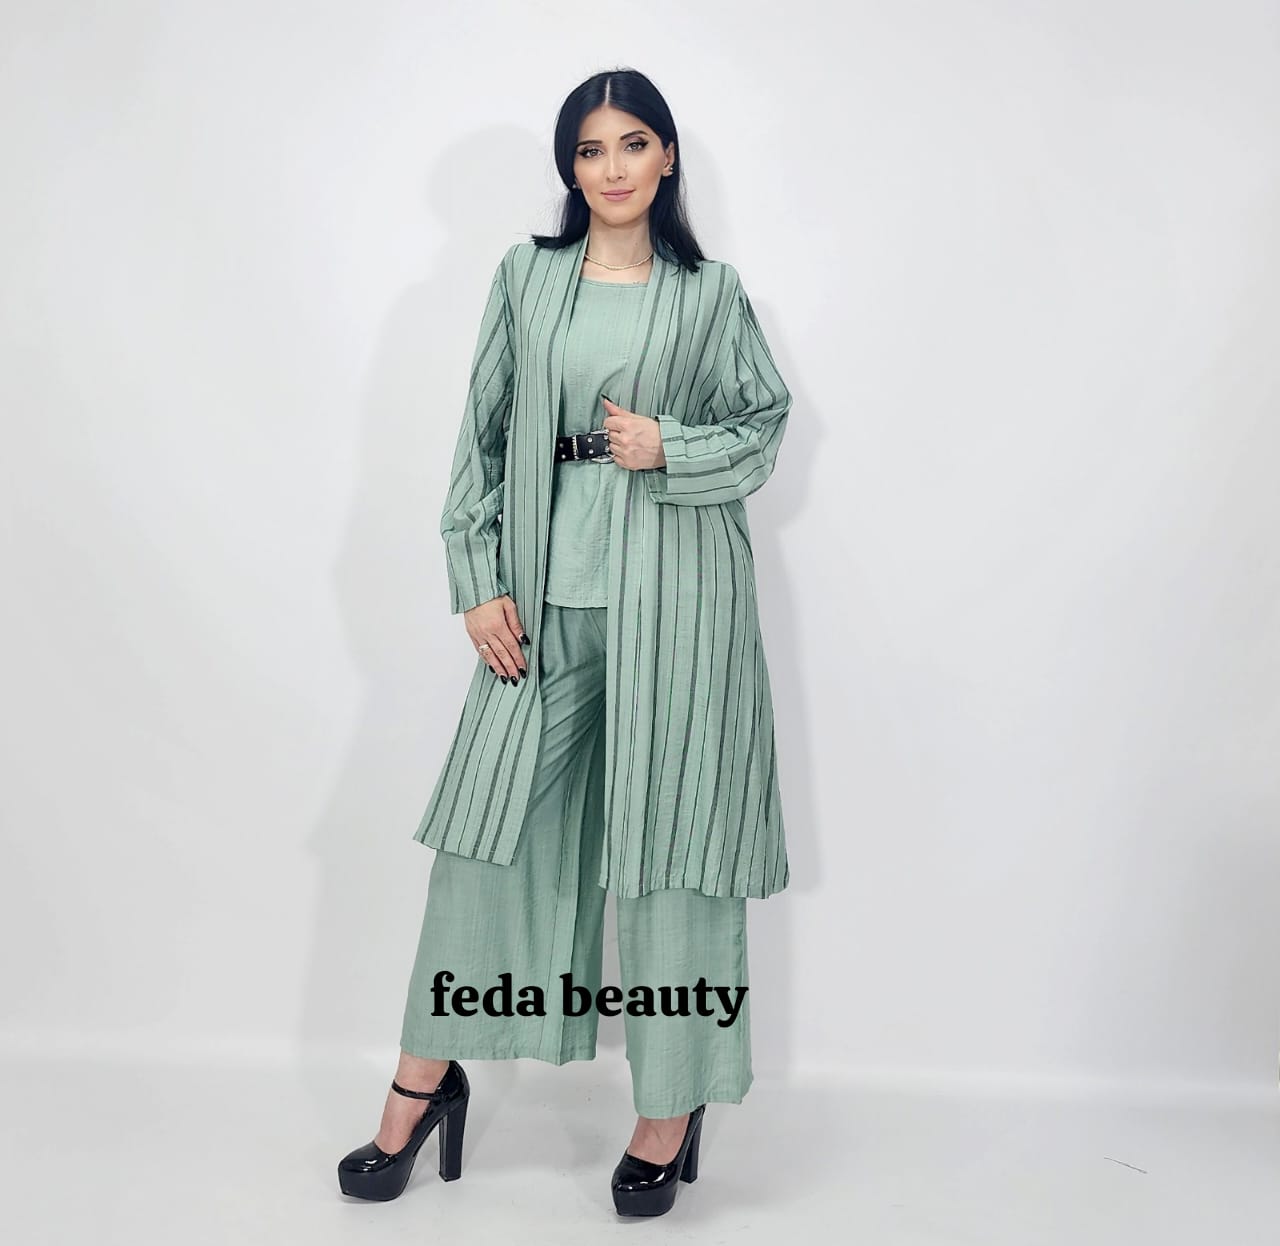 A collection of chalkboard sets with distinctive and new designs for  travel, work, daily wear, and trips from Fida Beauty's new and  special collection for the year 2023